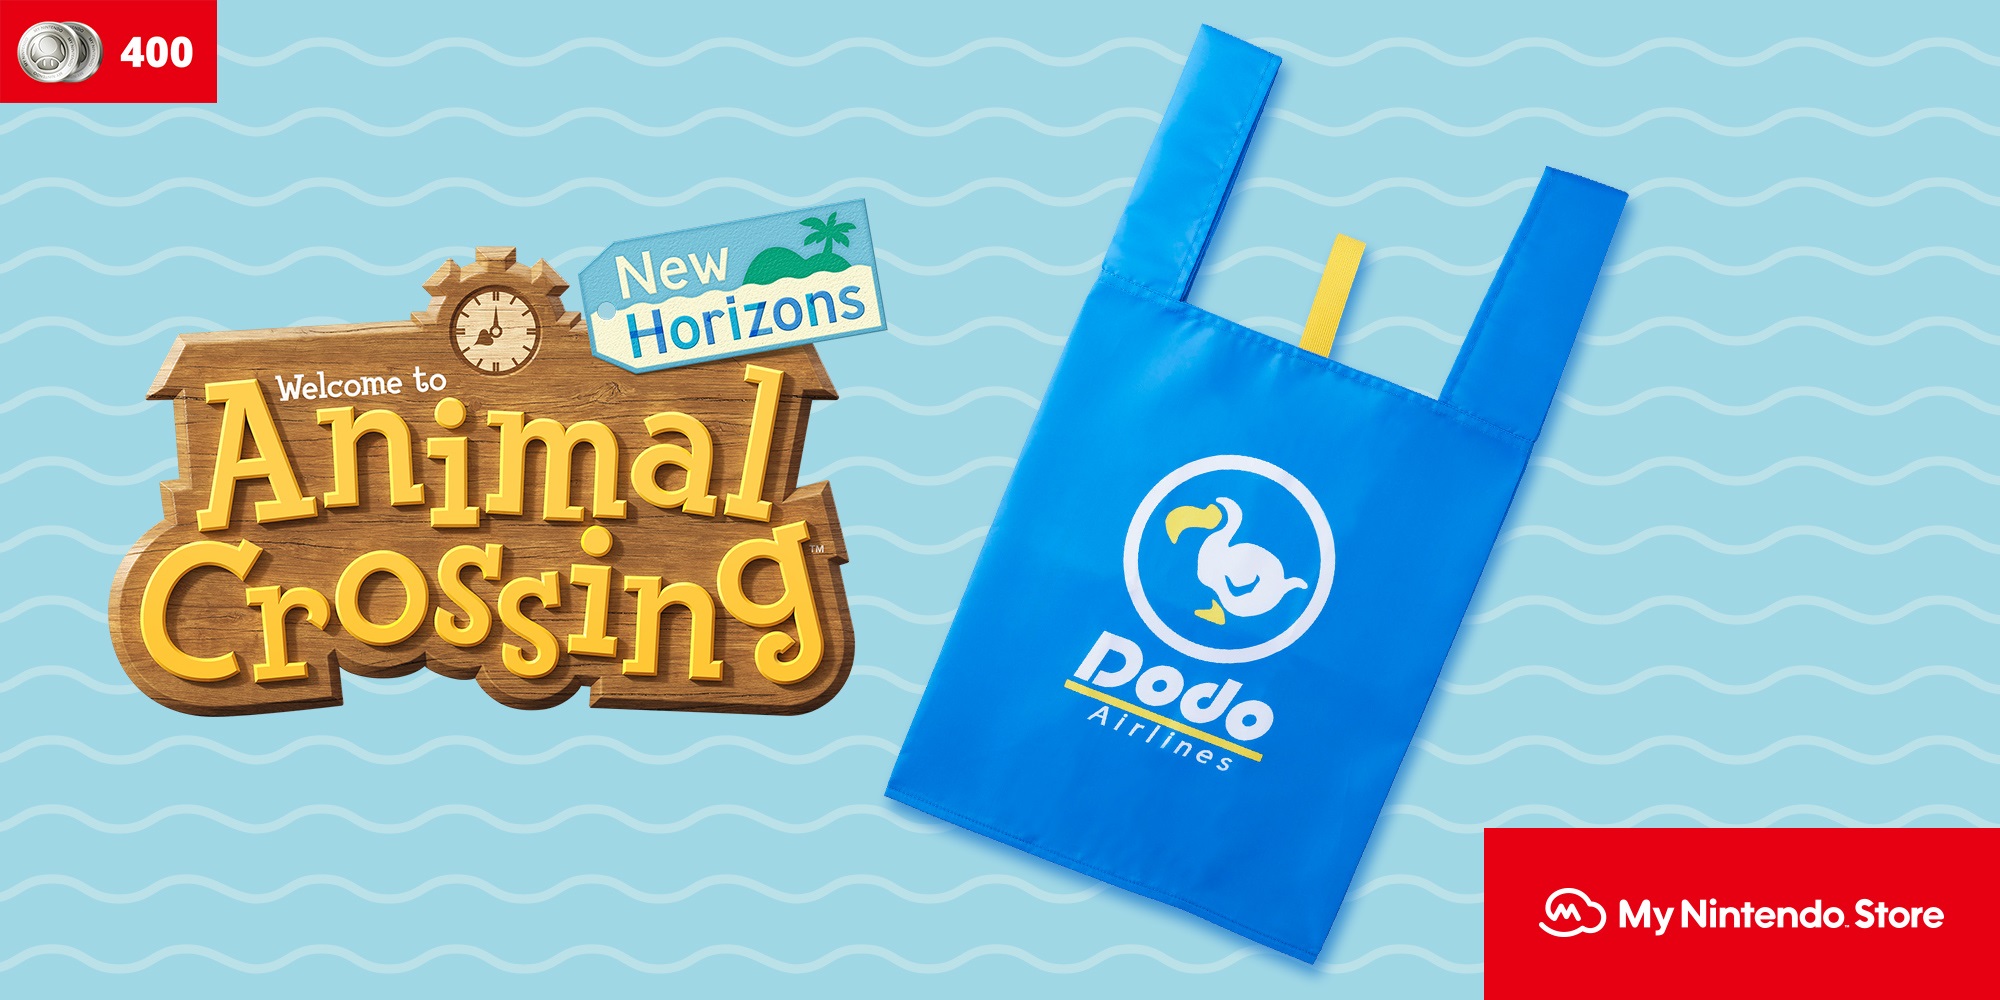 Nintendo Uk The Dodo Airlines Animal Crossing New Horizons Tote Bag Is Back In Stock On My Nintendo Store For 400 Platinum Points Plus Shipping Get Yours Now T Co D6gd67qwqi T Co I4dcfuhpbm